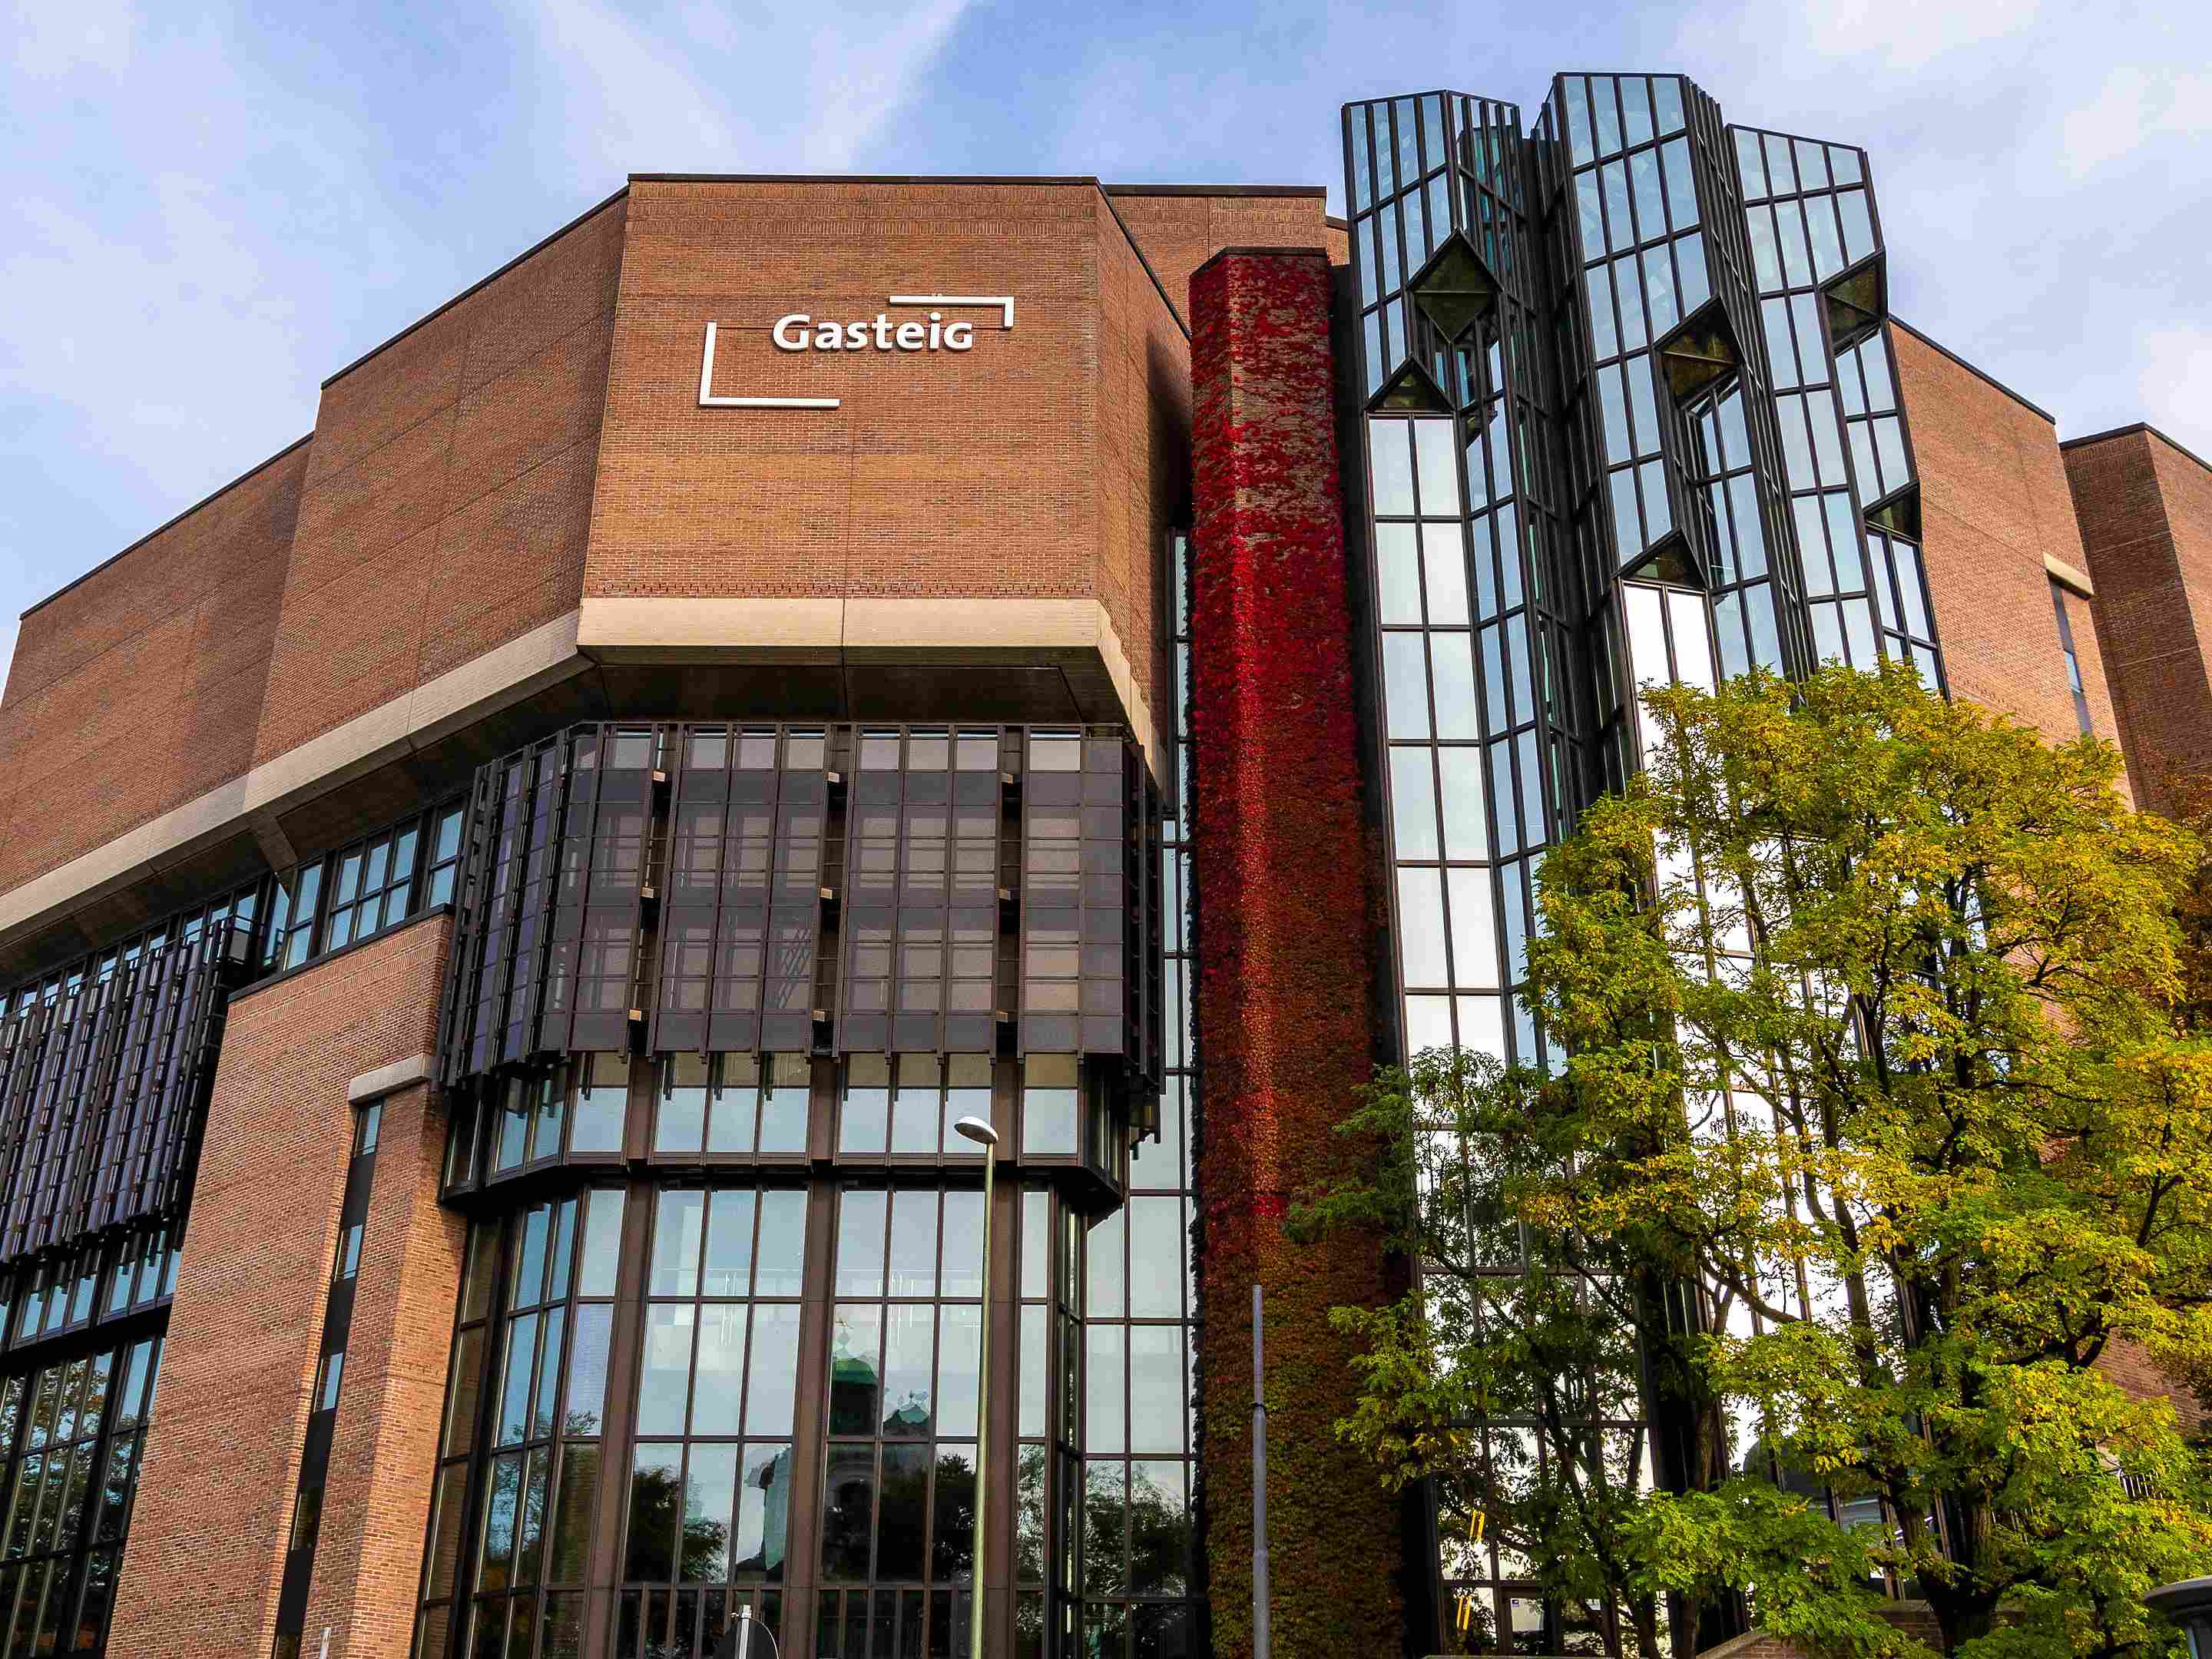 The Gasteig is Europe's largest cultural center 1 minute walk